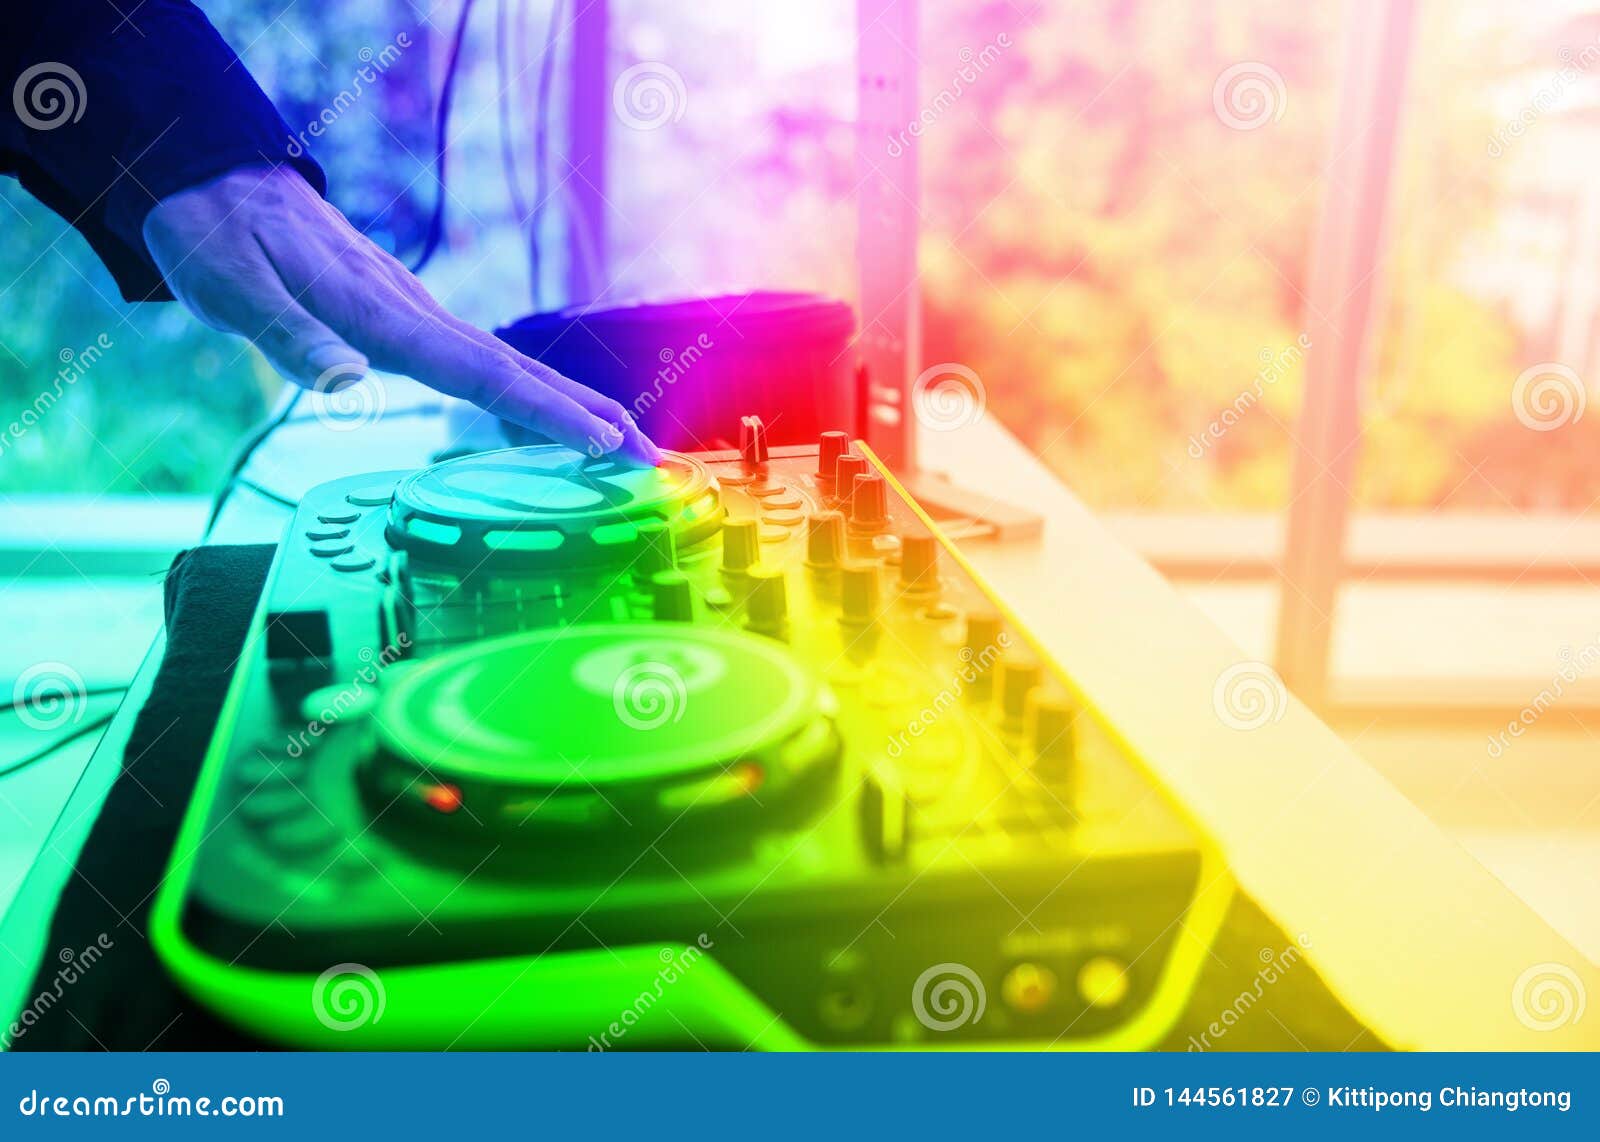 Hand of Technician Using Sound System Mixing Audio Equipment Board on Stage  with Soft  Mixing Sound in Party at Pub and Stock Image - Image of  audio, background: 144561827